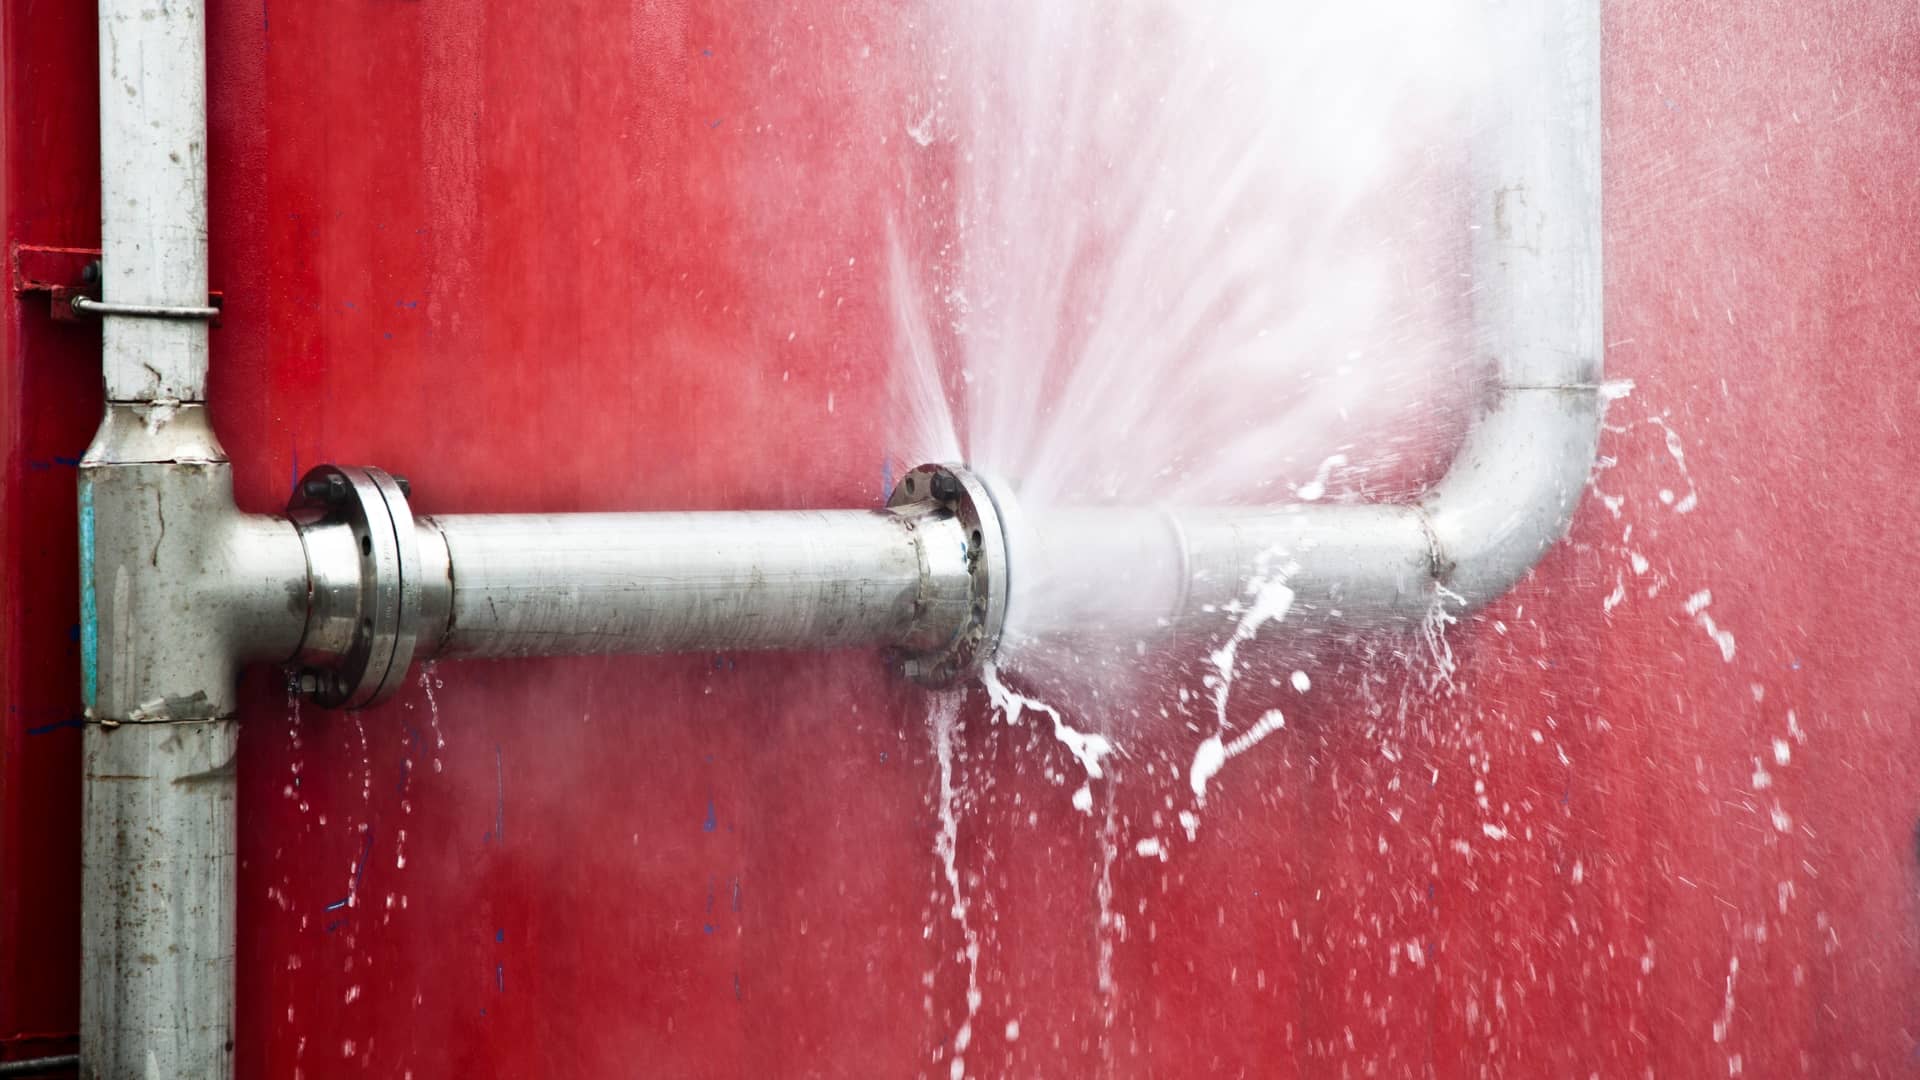 A burst high-pressure metal pipe spraying water against a red wall.